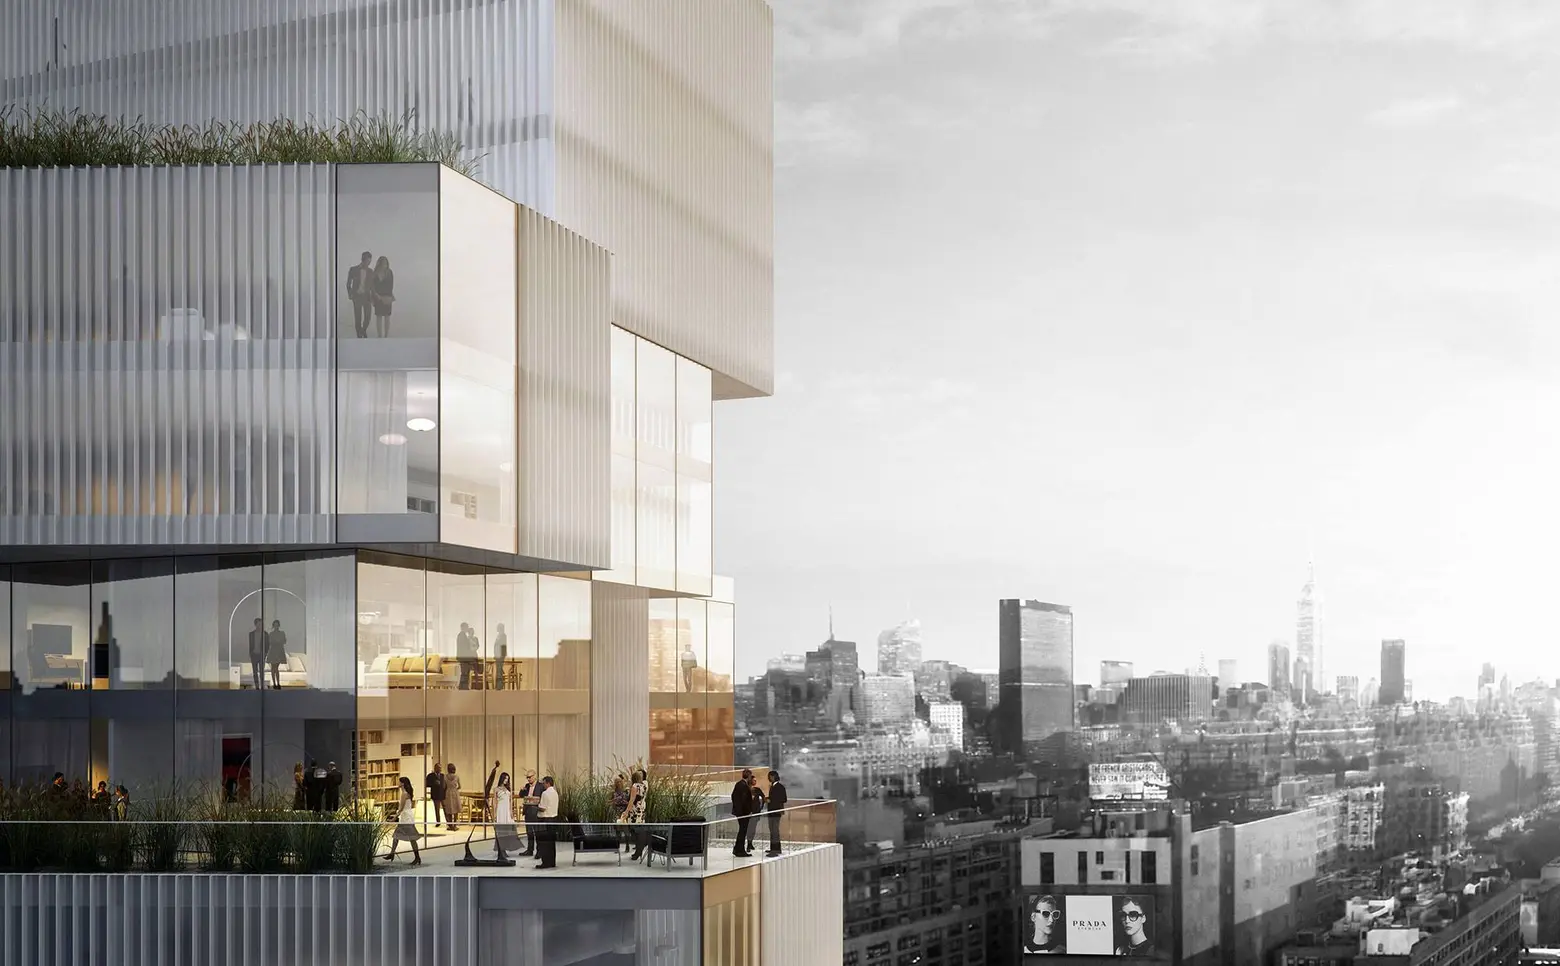 Studio Seilern designs boxy, mixed-use tower for West Chelsea’s ‘starchitects row’